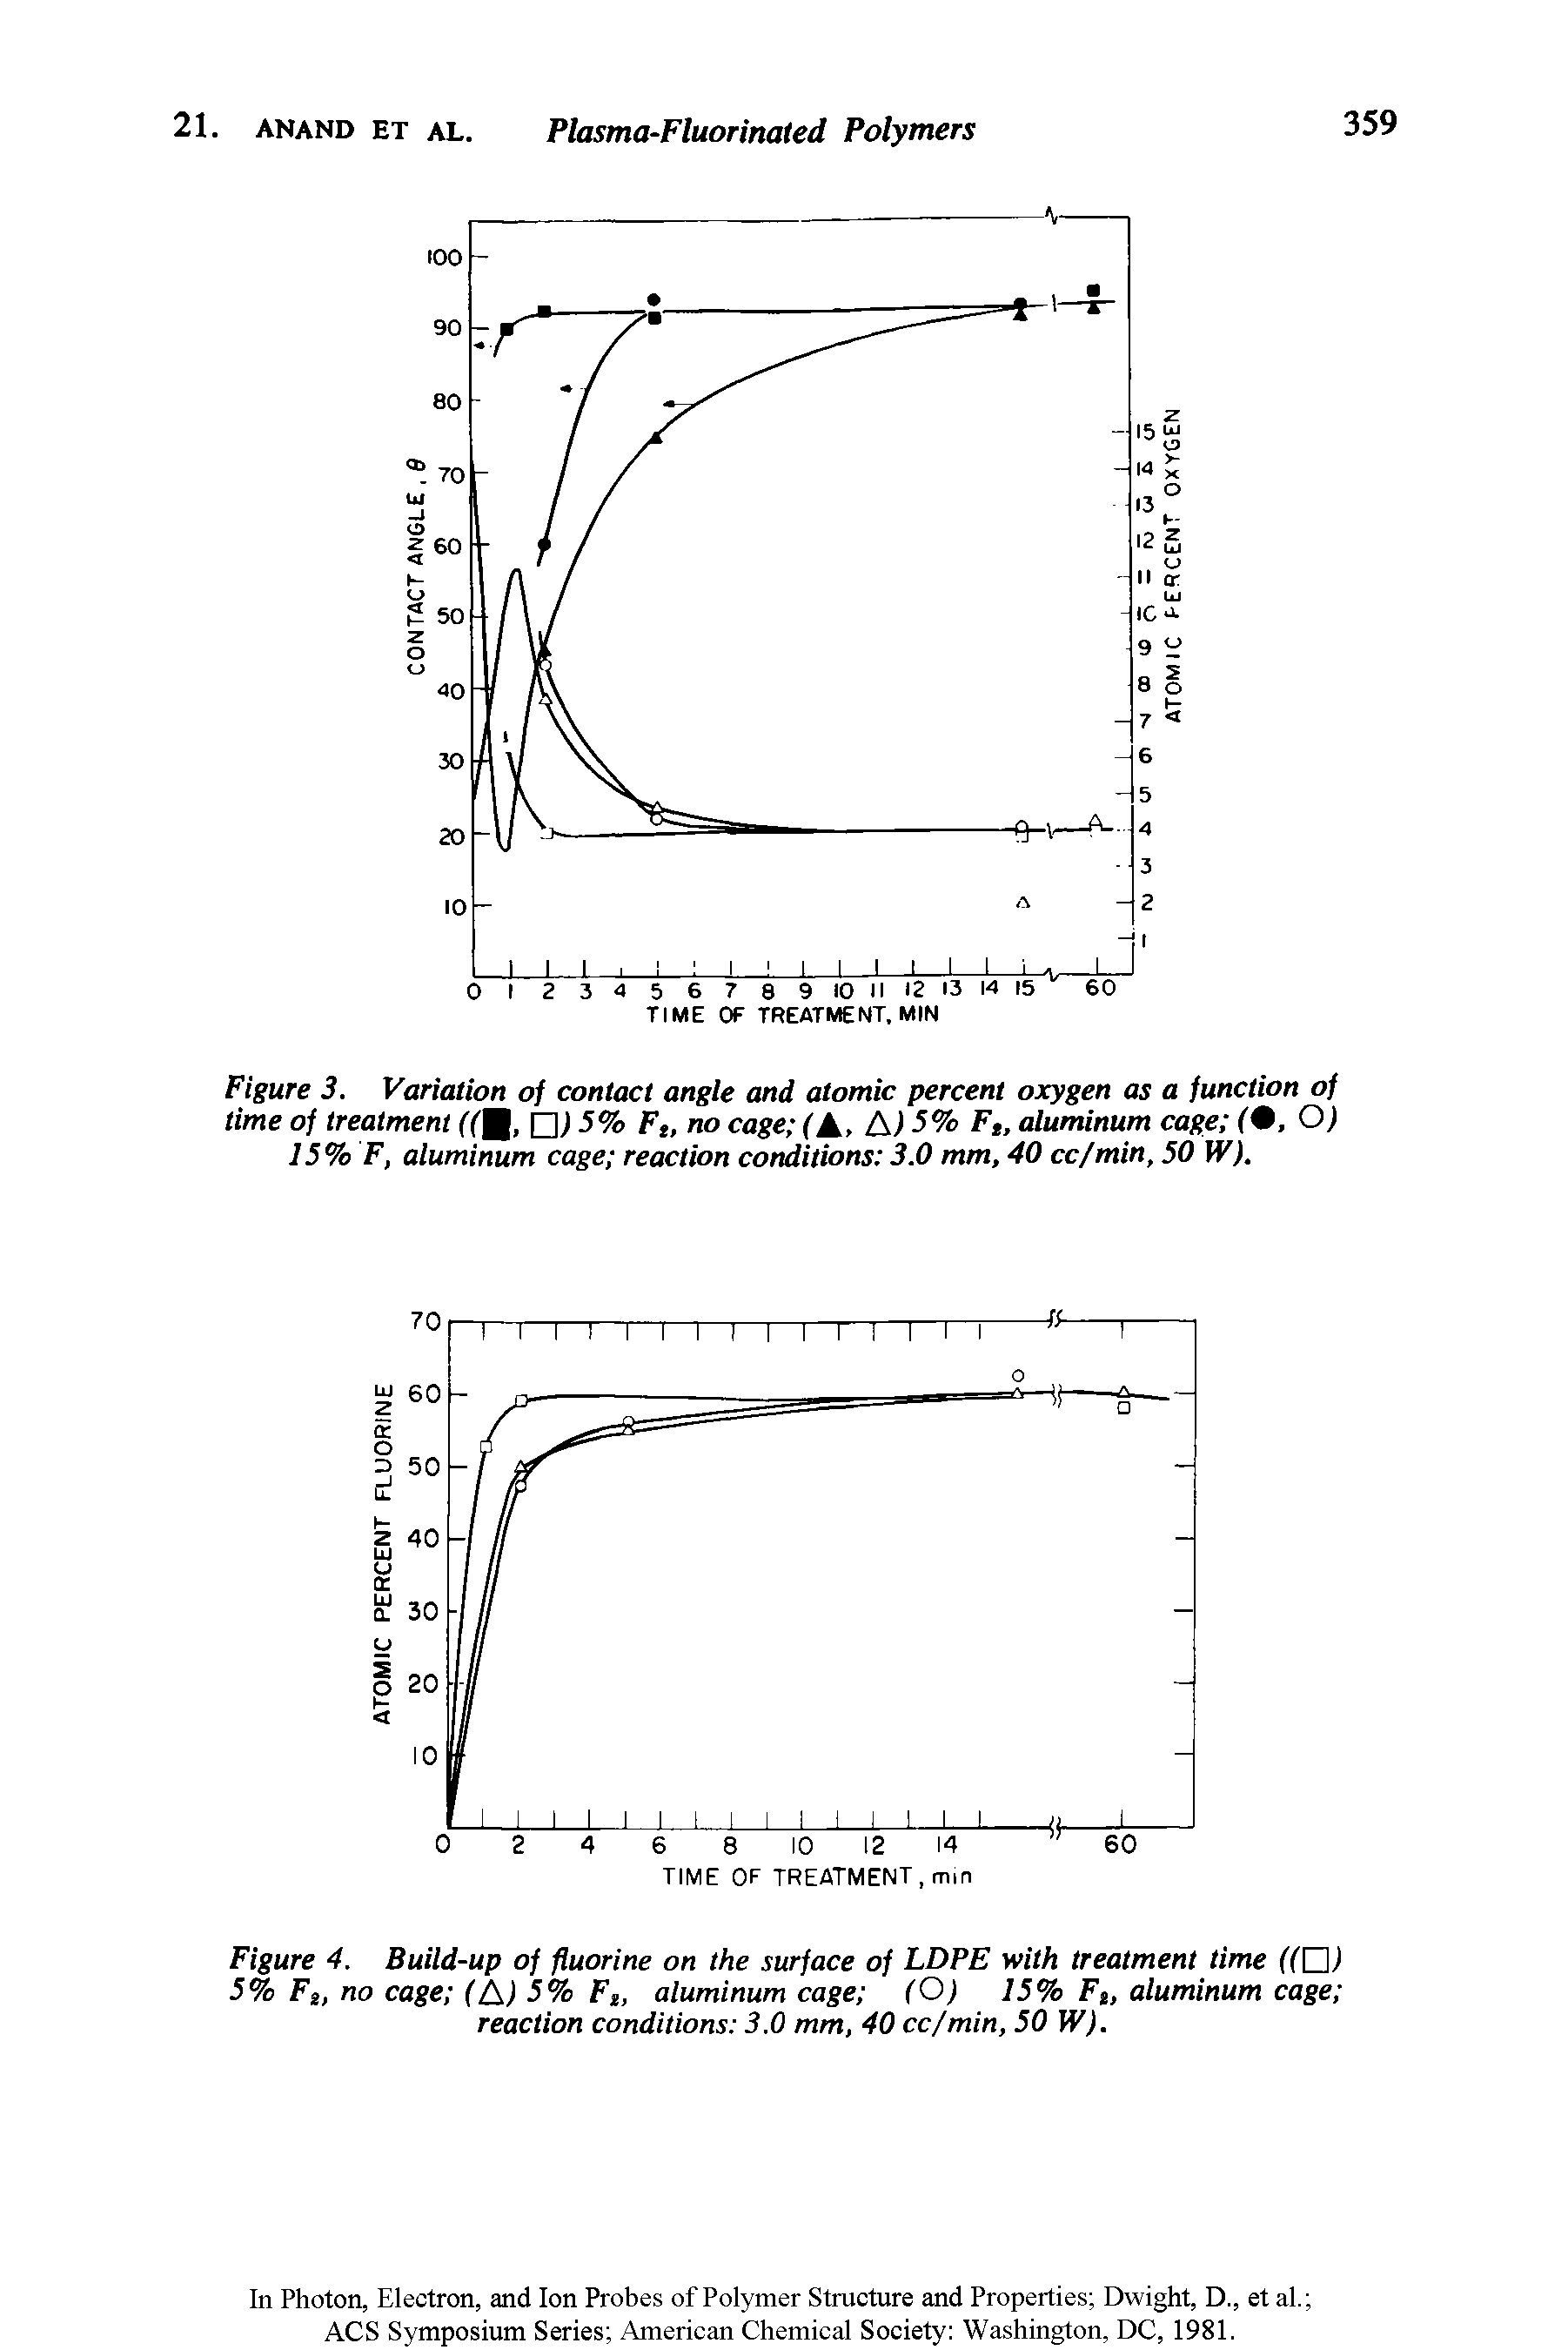 Figure 3. Variation of contact angle and atomic percent oxygen as a function of time of treatment ((, 15% Ft, no cage (A., A) 3% Ft, aluminum cage (9, O) 15% F, aluminum cage reaction cortditions 3.0 mm, 40 cc/min, 50 W).